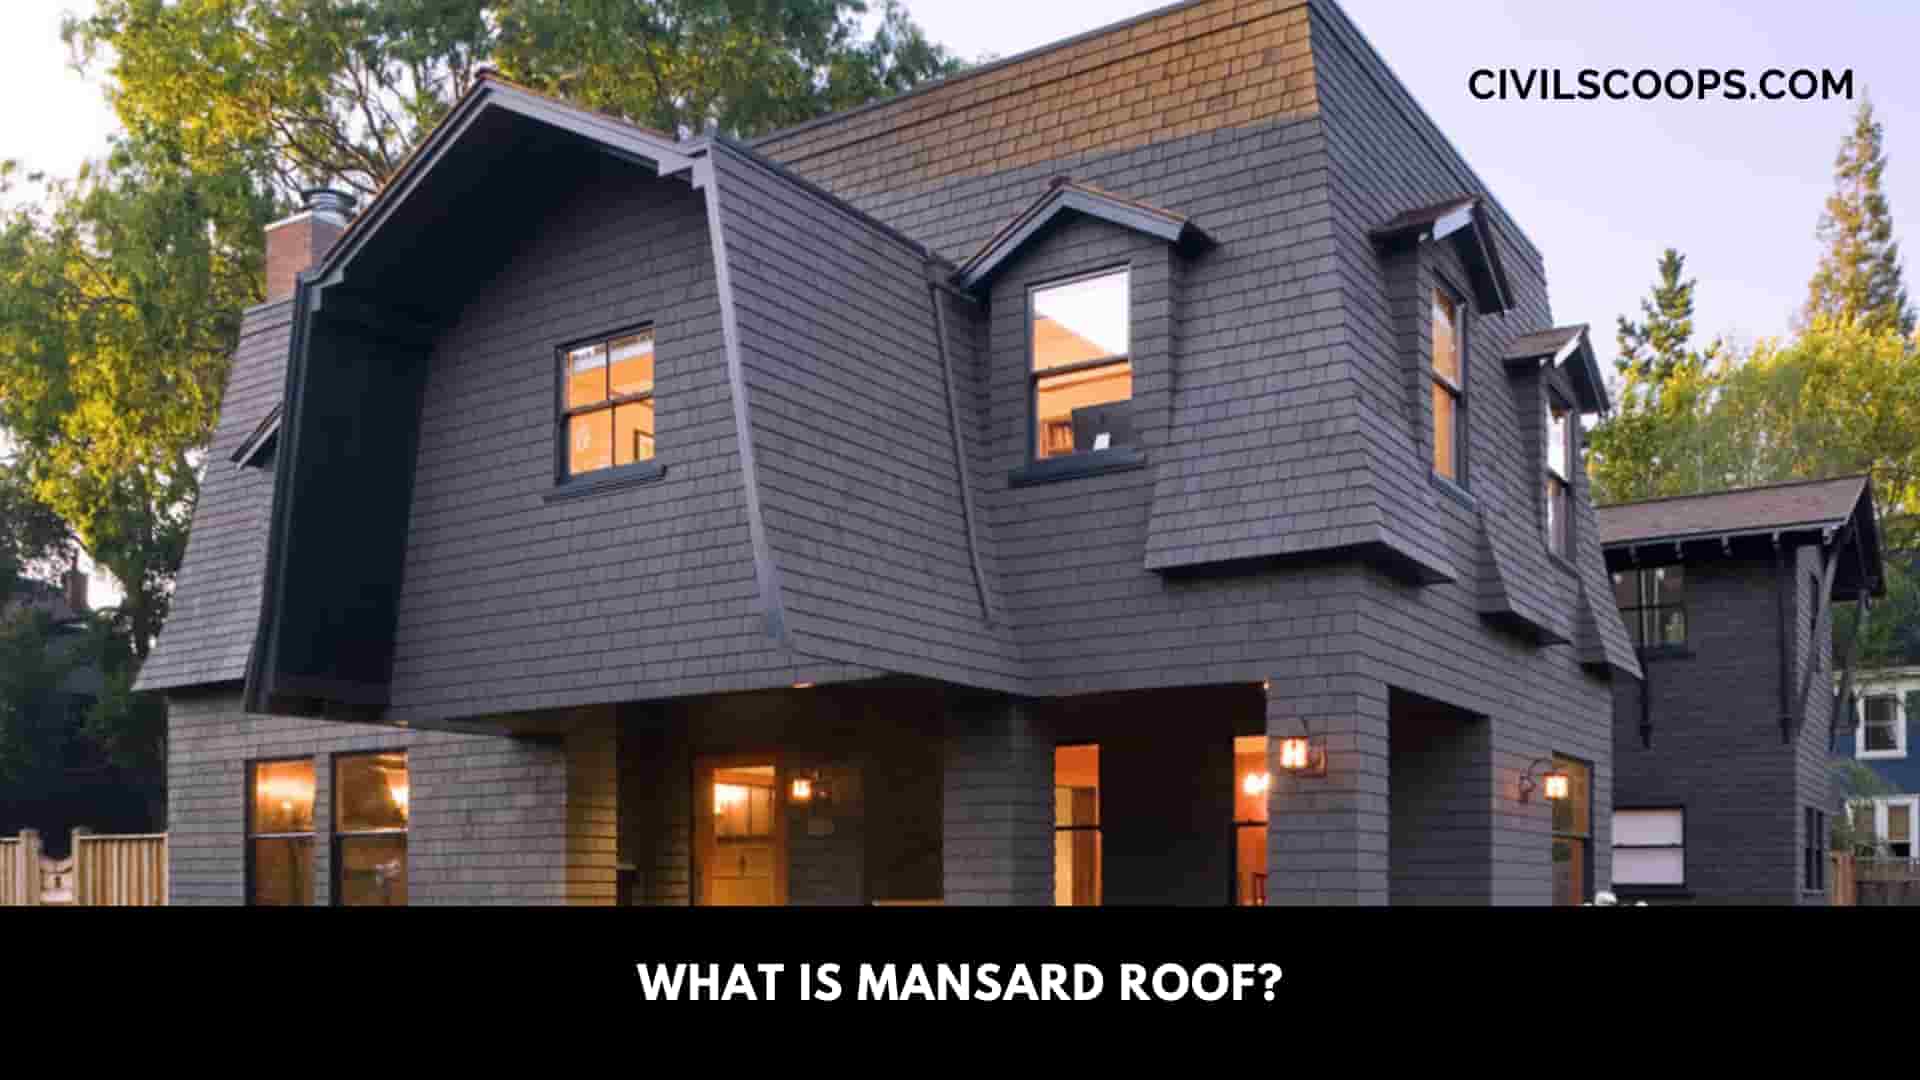 What Is Mansard Roof?